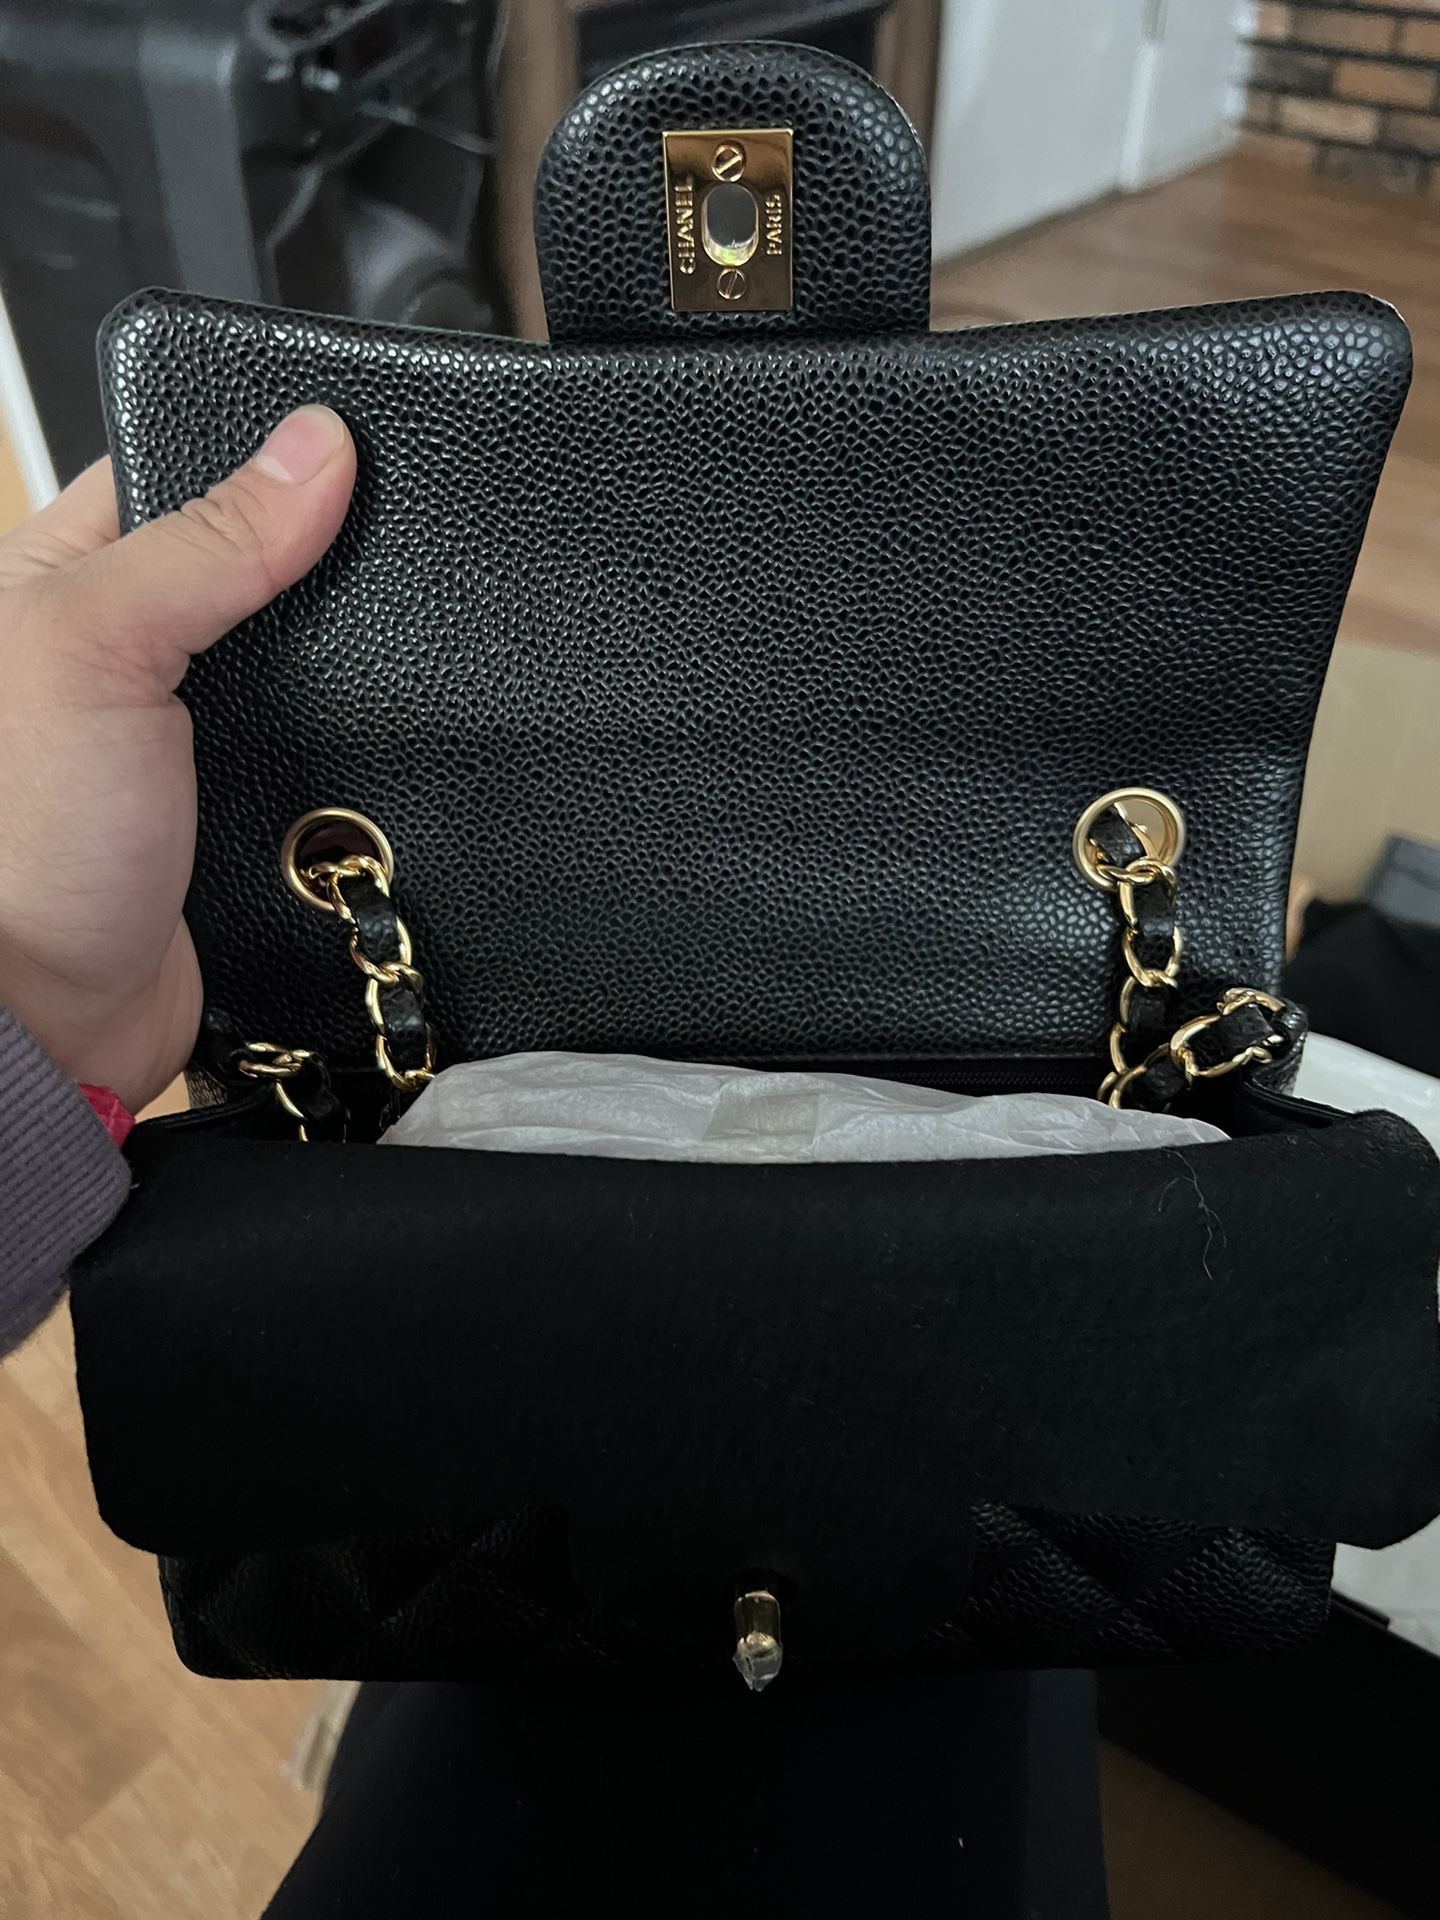 Louis Vuitton Bag for Sale in Newark, CA - OfferUp